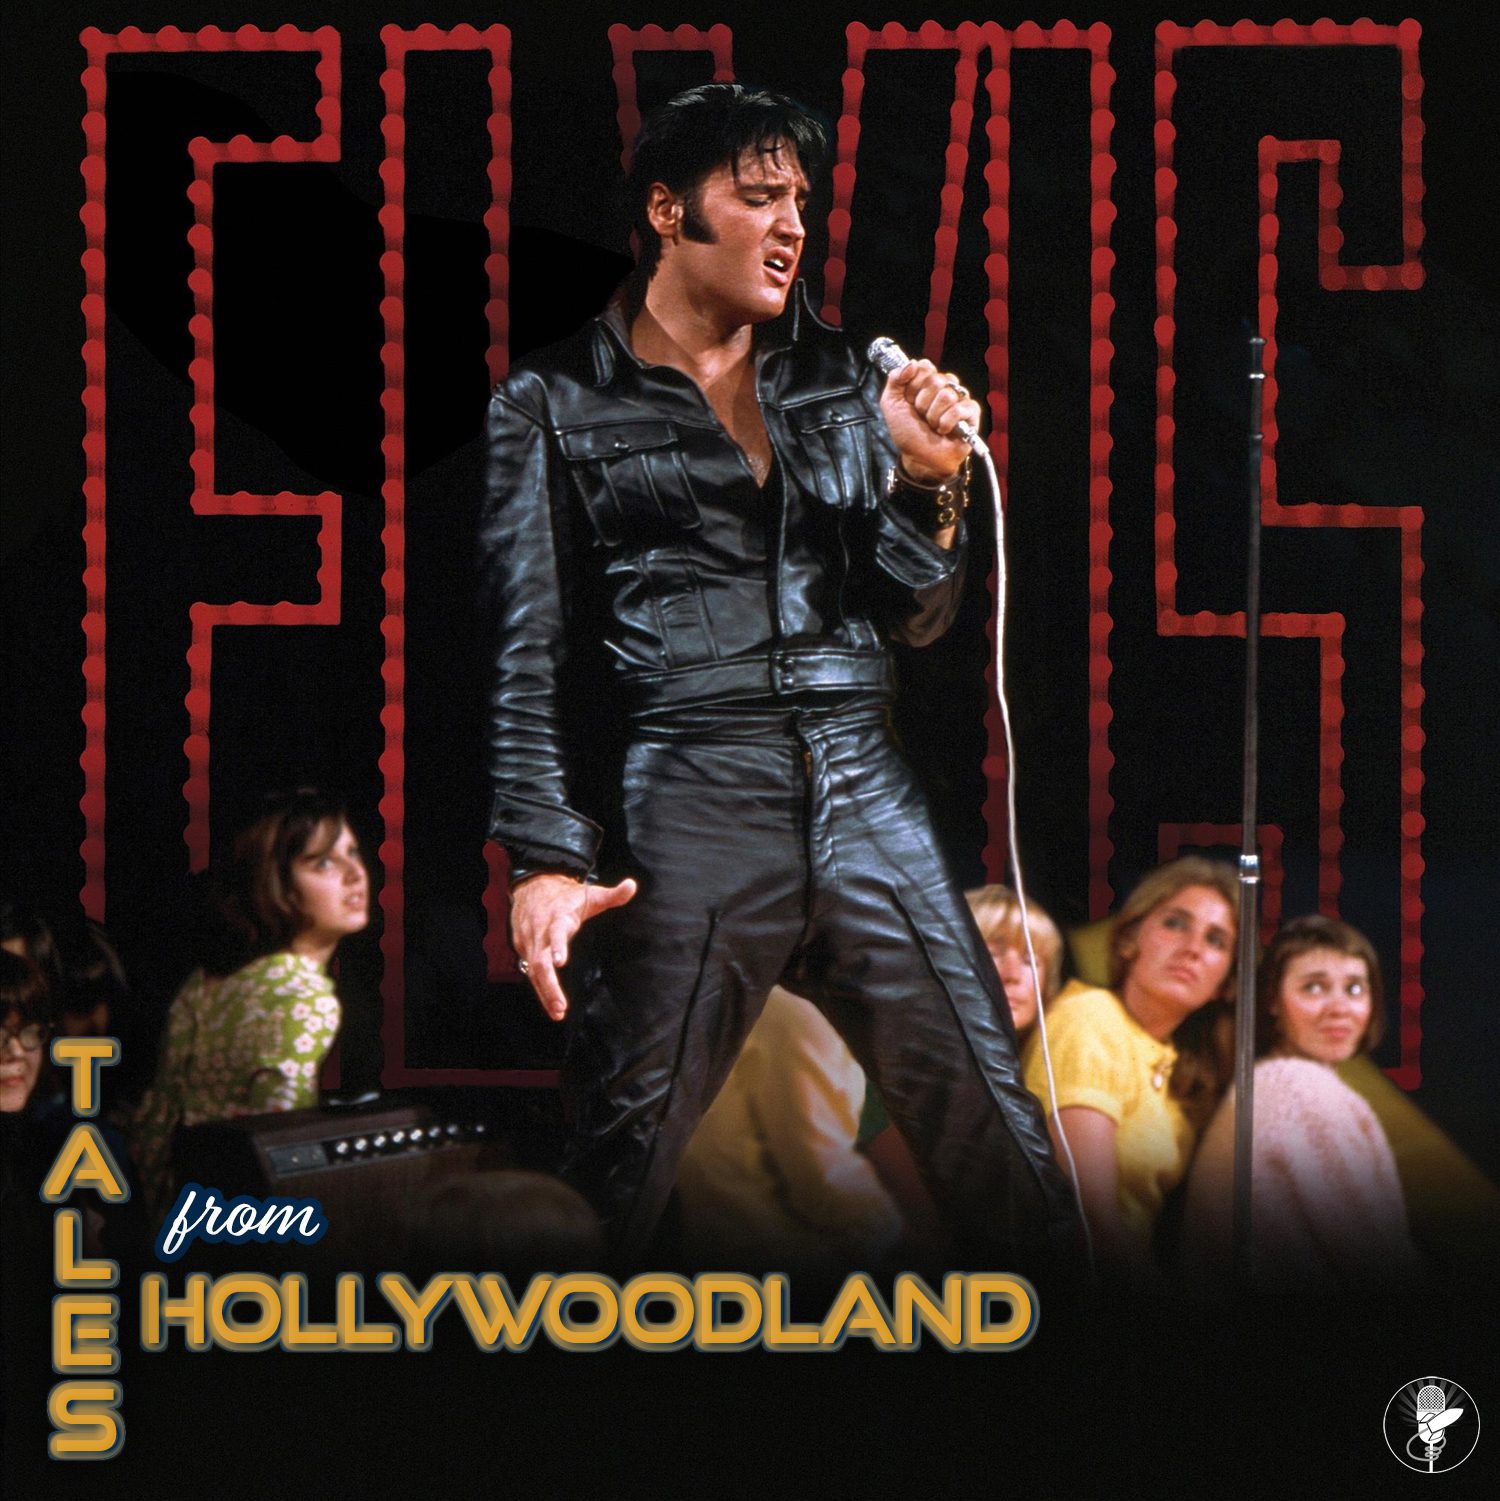 Tales From Hollywoodland Ep 44 Elvis is Everywhere